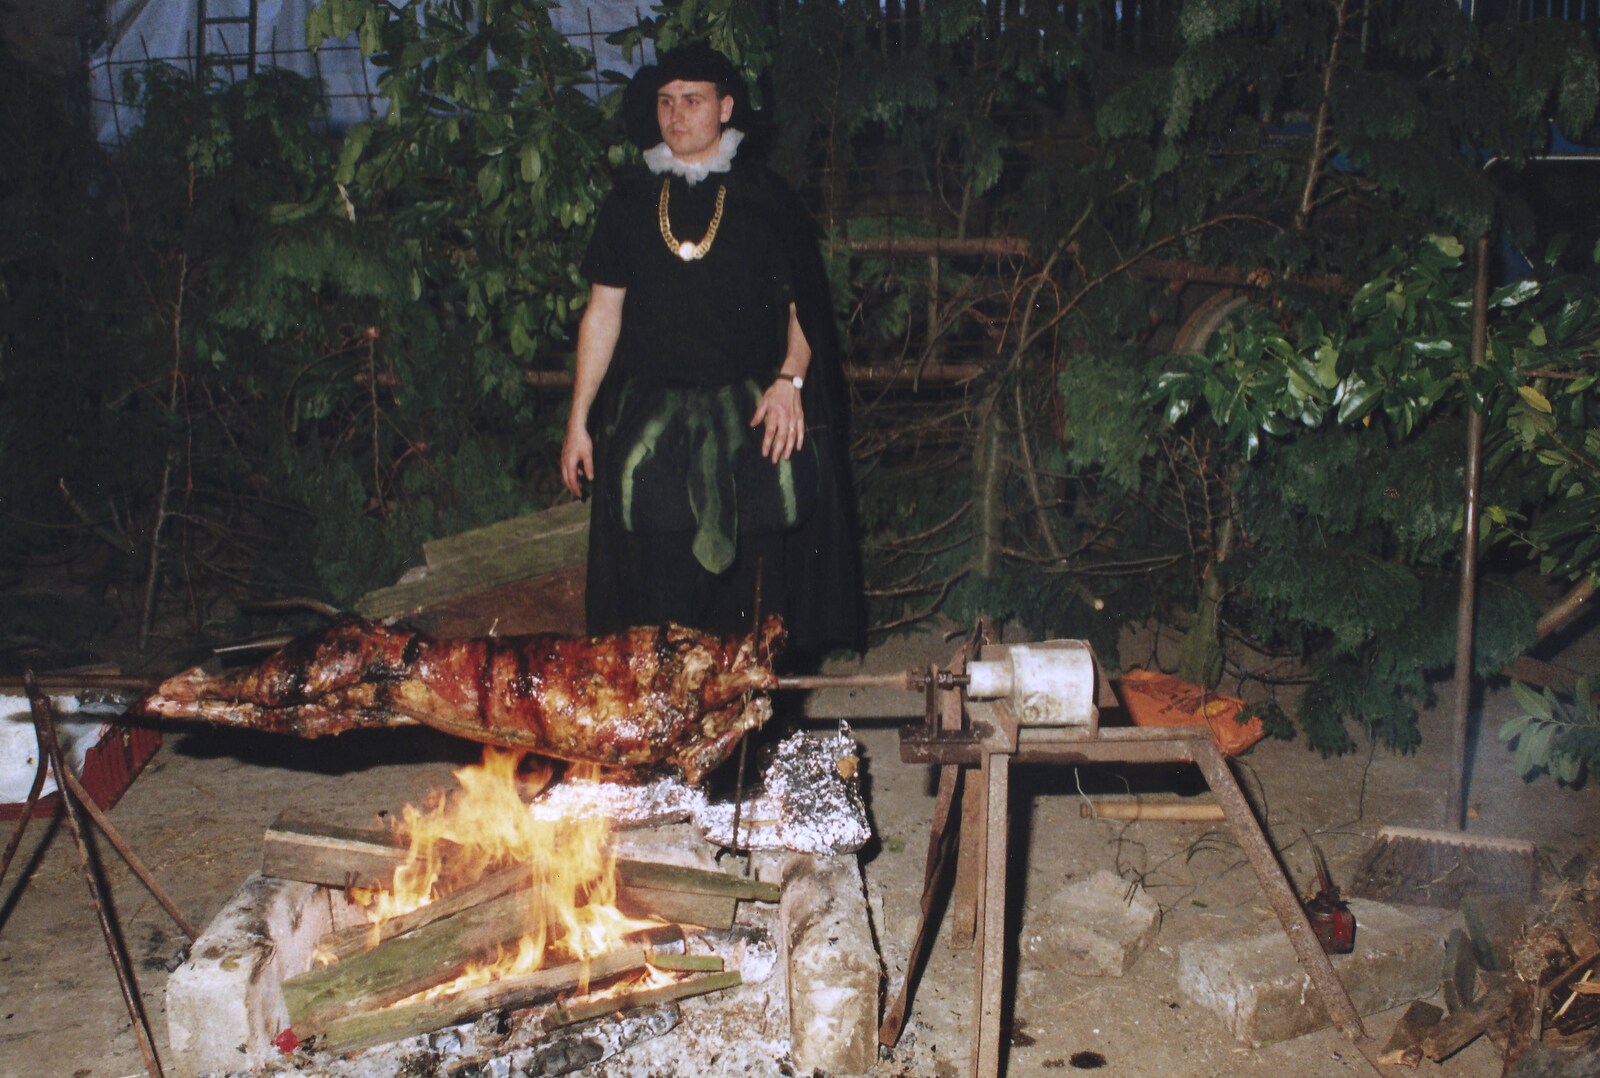 An entire lamb is spit-roasted from A Mediaeval Birthday Party, Starston, Norfolk - 27th July 1990